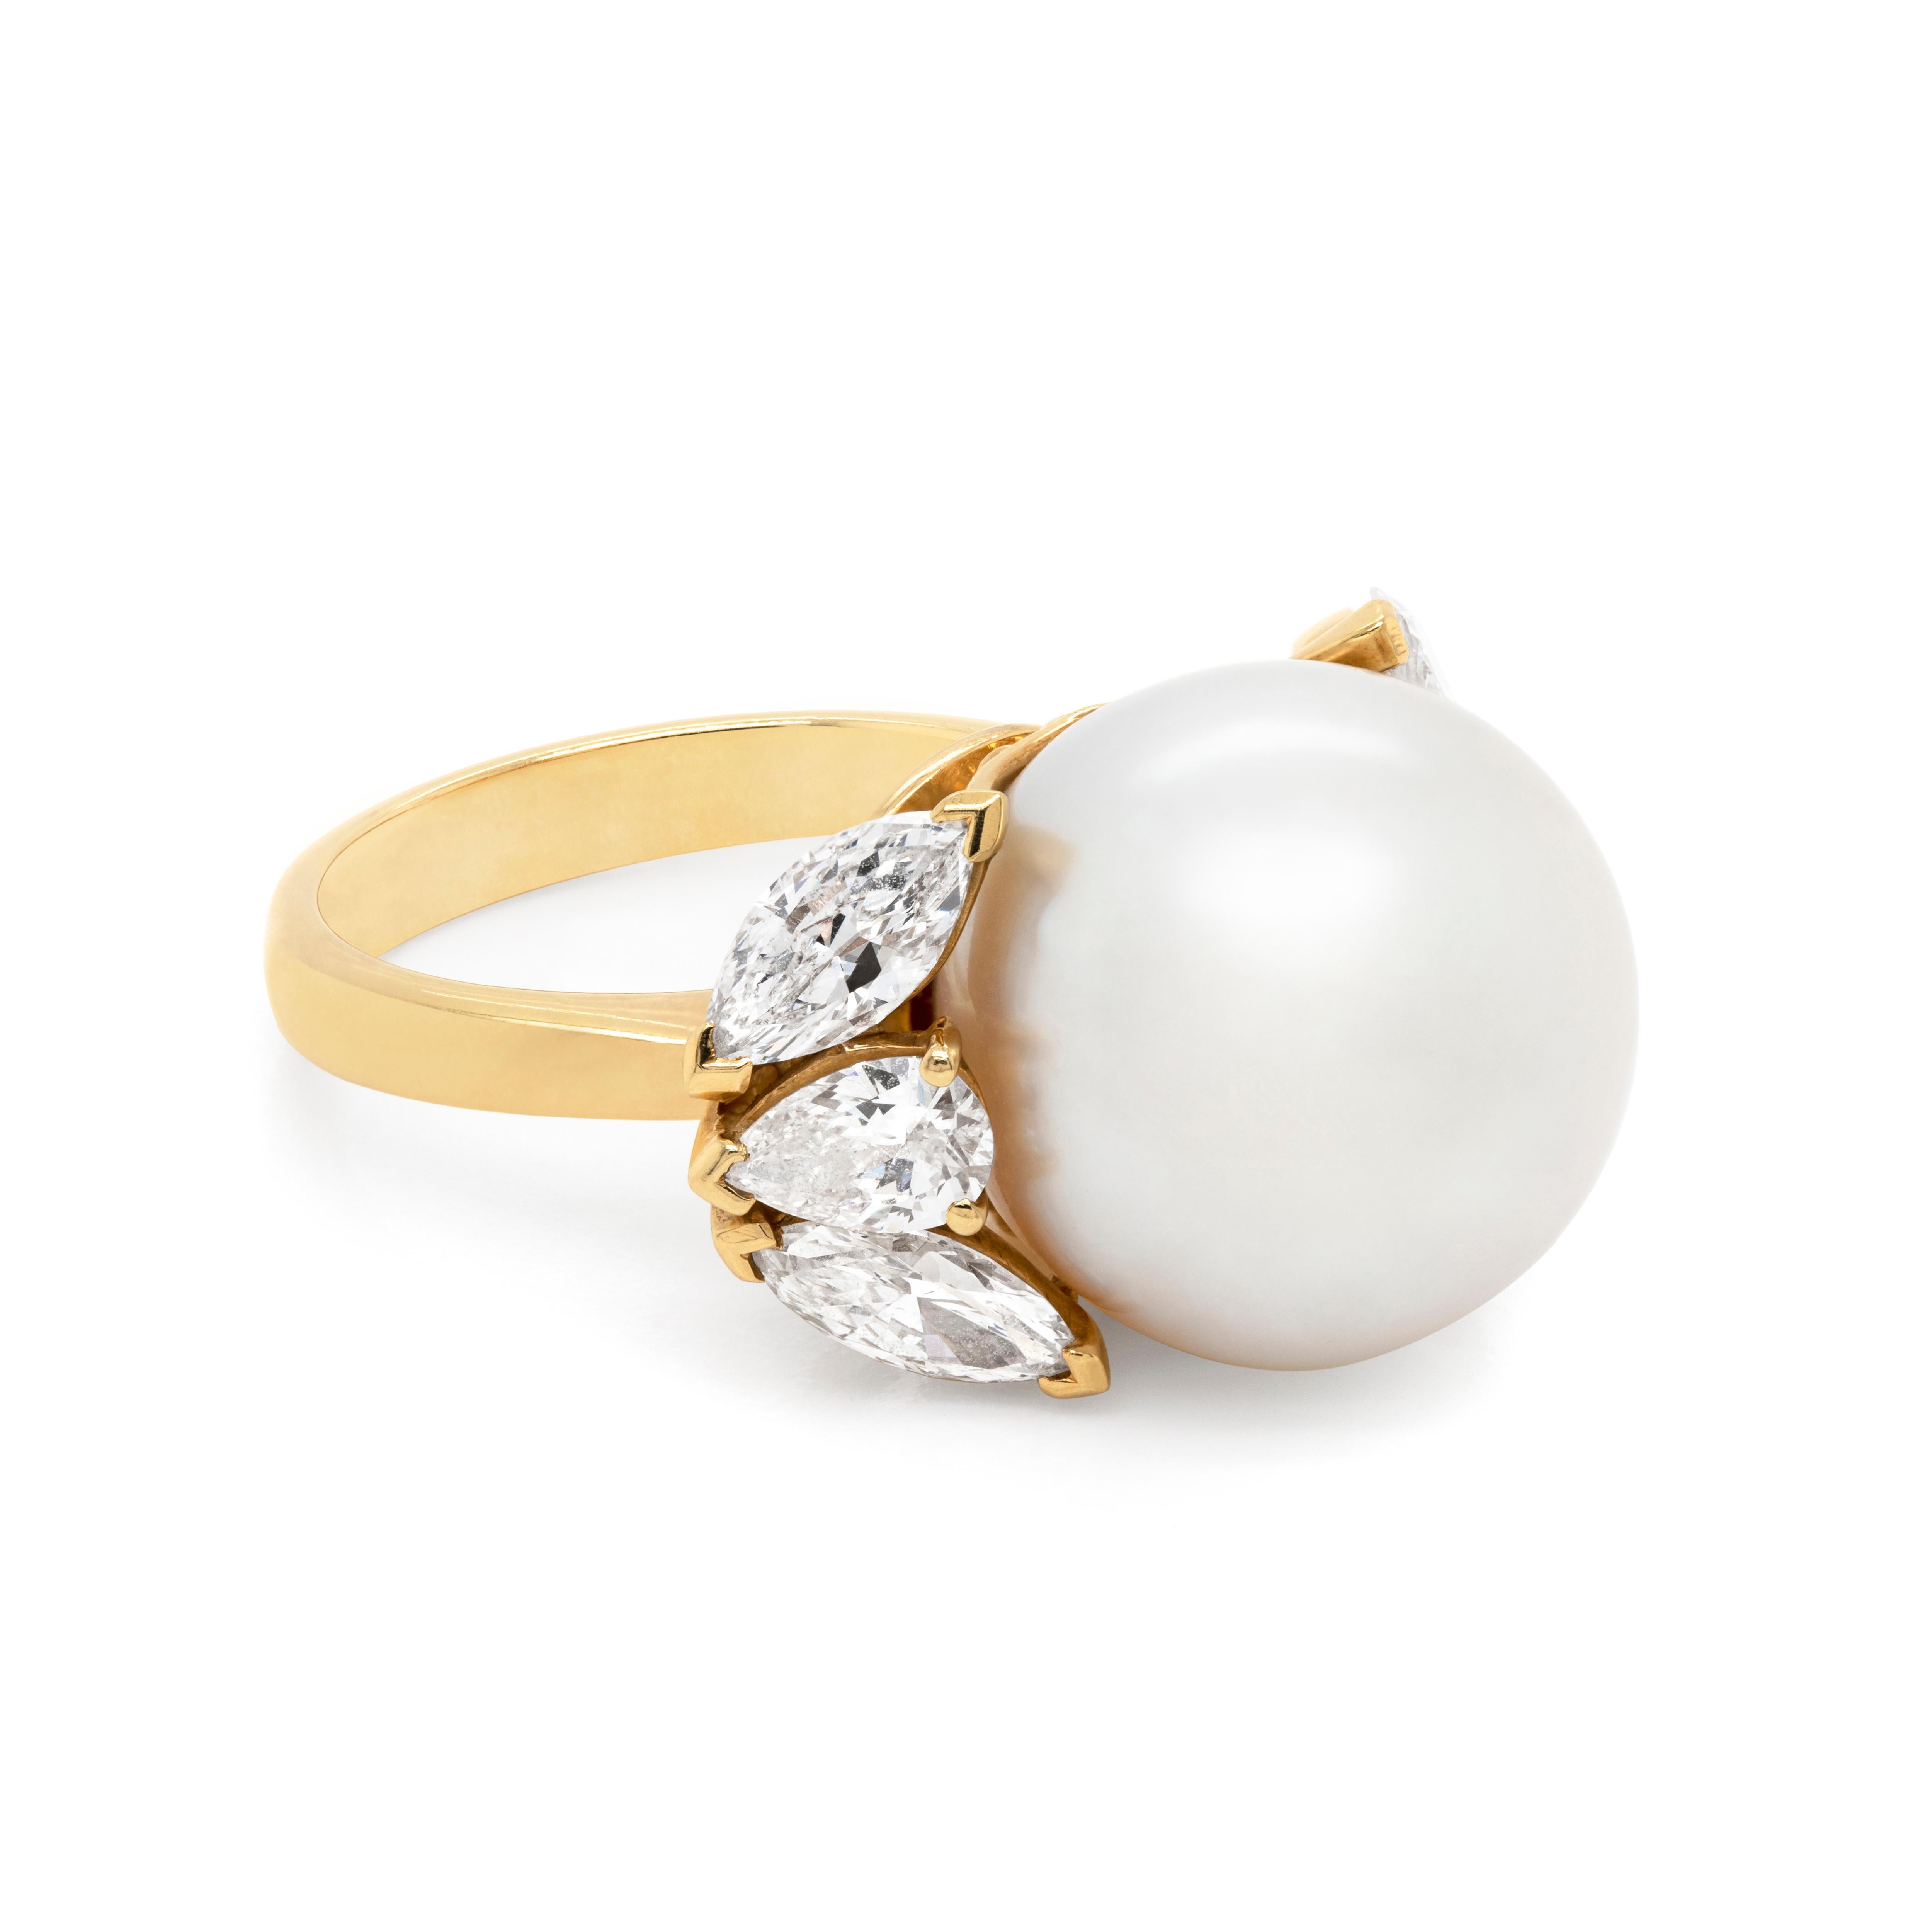 This handmade dress ring features a beautiful cultured white South Sea pearl measuring 14.5mm in the center accompanied by a trilogy of diamonds hugging the pearl on either side. The stones consist of two marquise shaped diamonds weighing